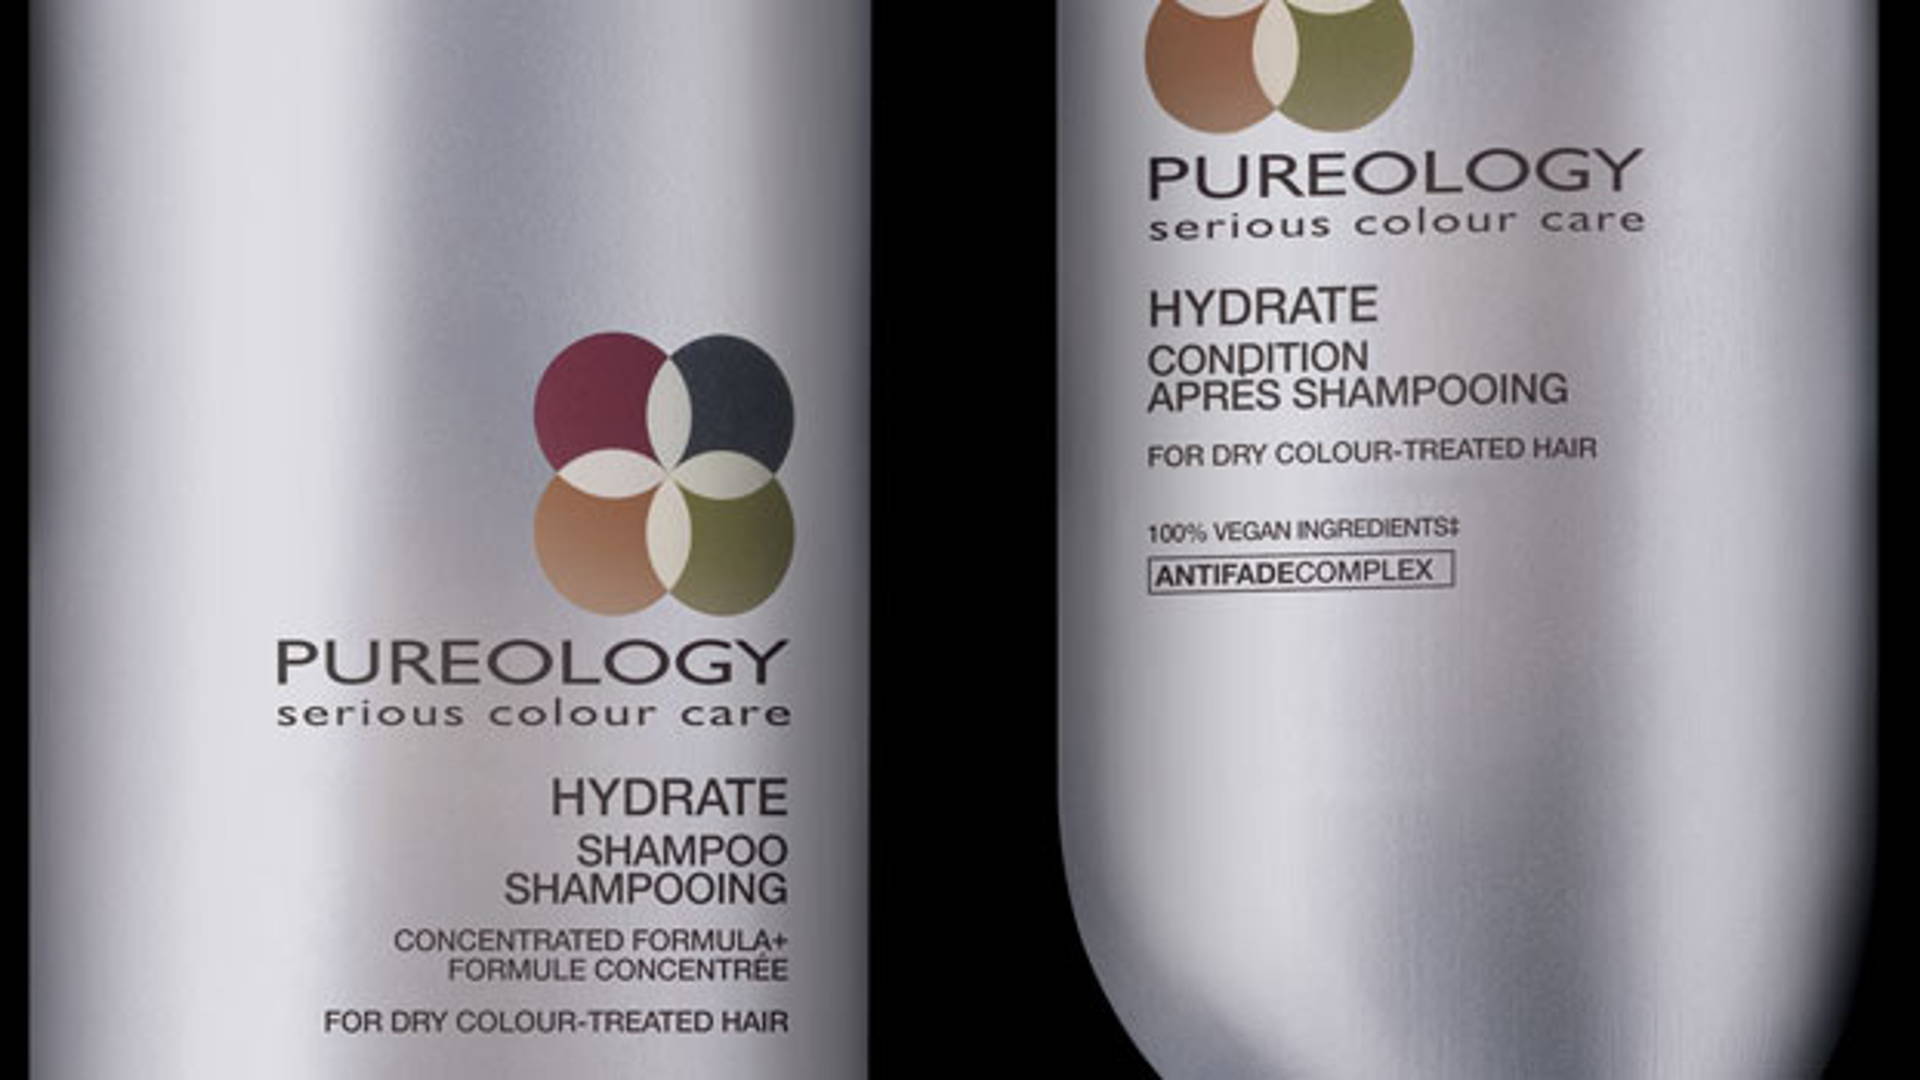 Featured image for Pureology by L'Oreal